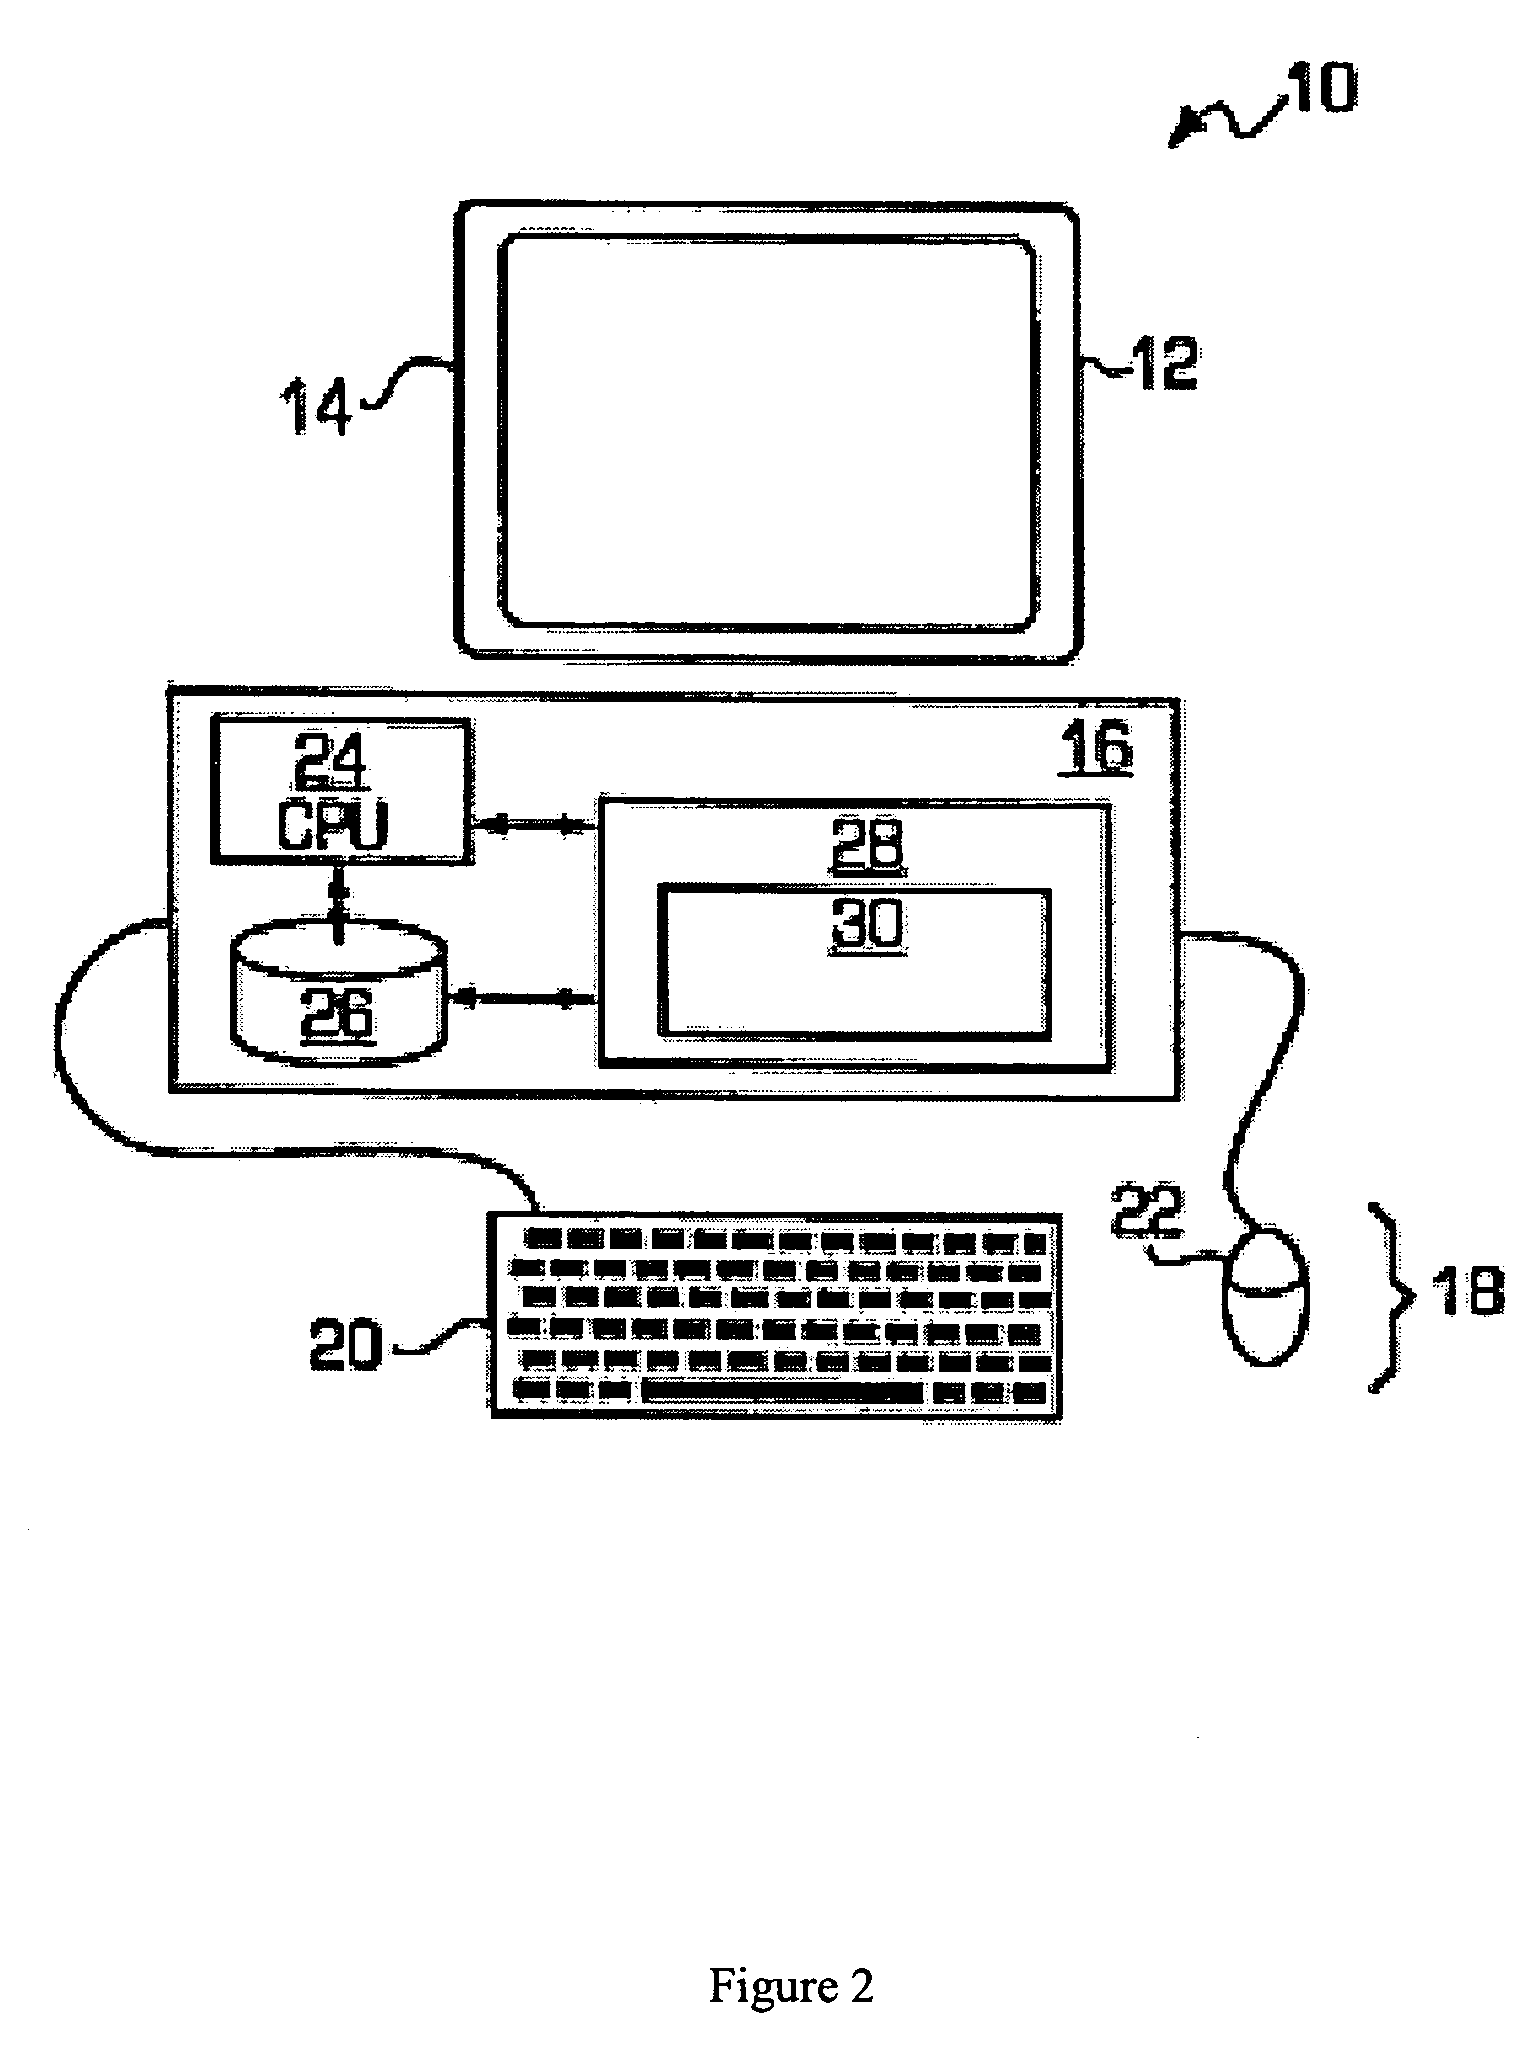 System for designing integrated circuits with enhanced manufacturability